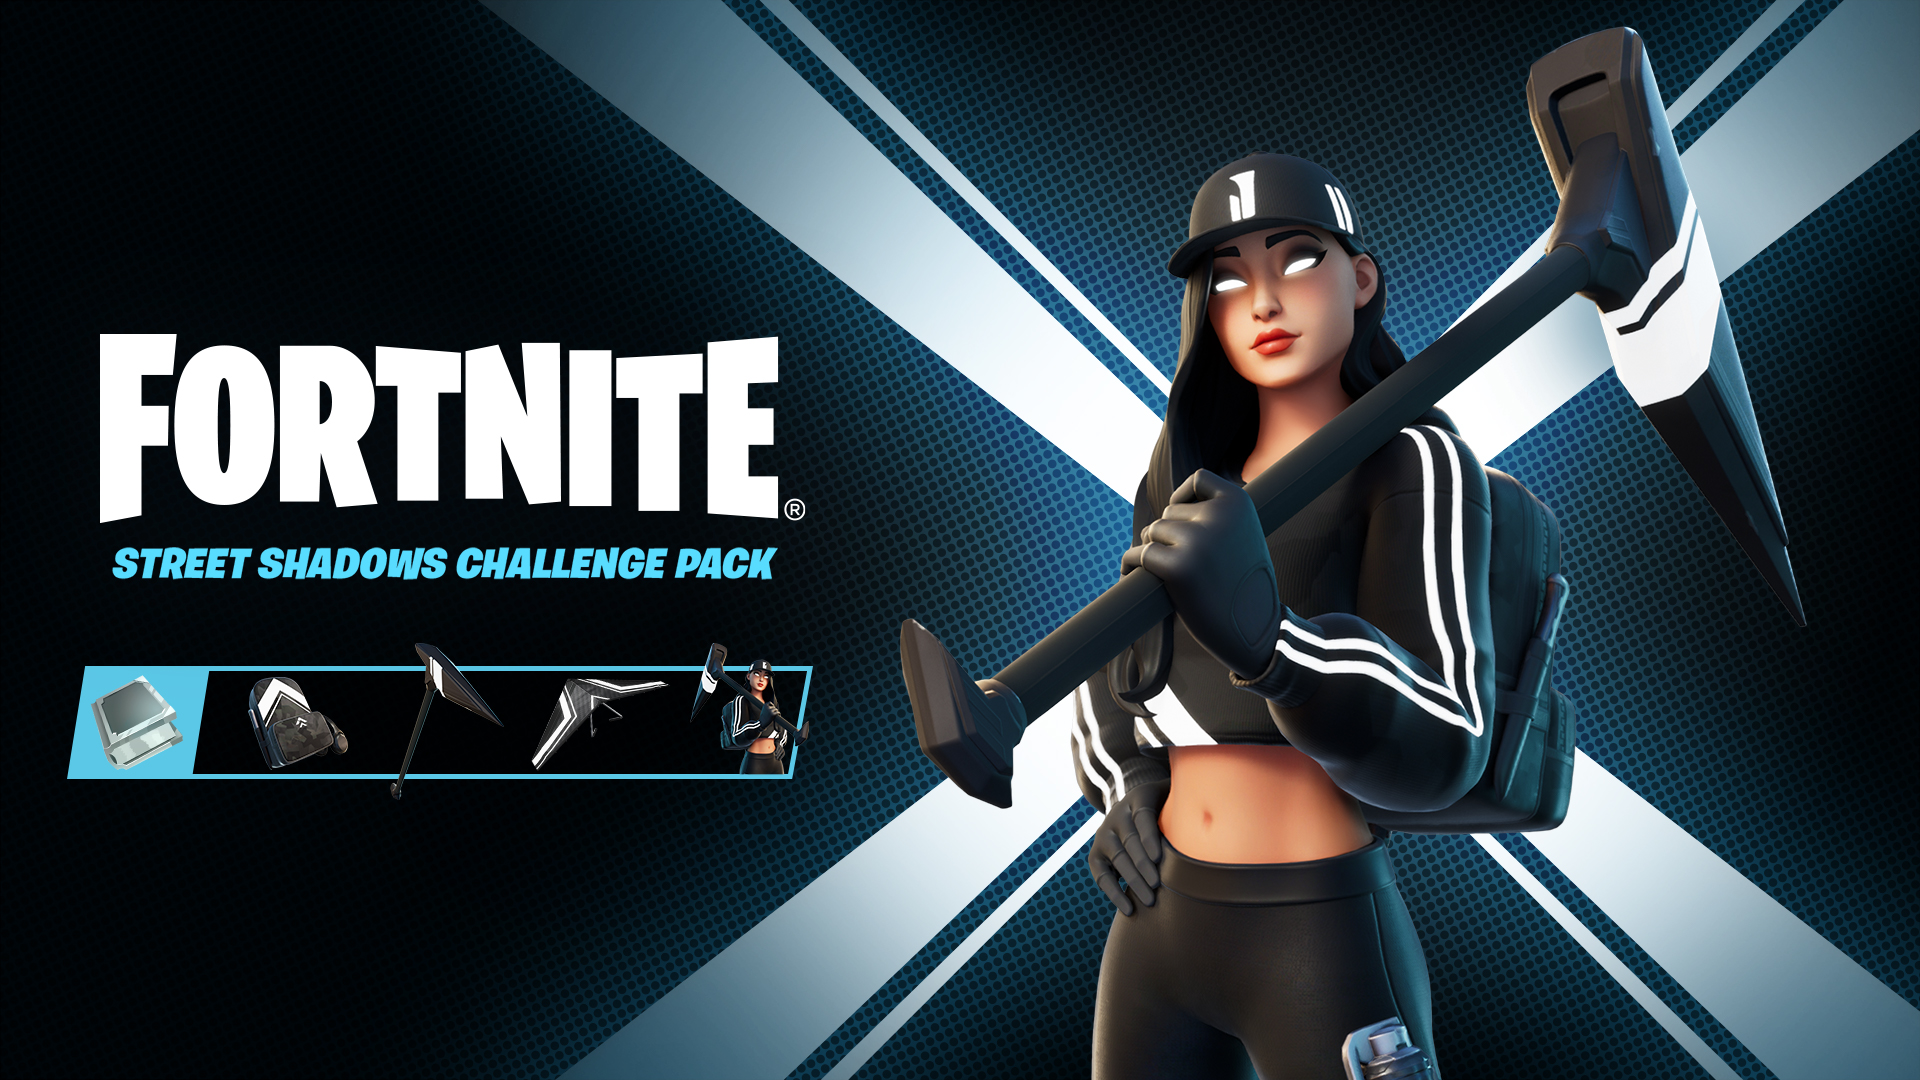 Fortnite, it's more fun to stay in the shadows. PC players, log in and head to the Shop to claim the Street Shadows Challenge Pack and unlock free rewards